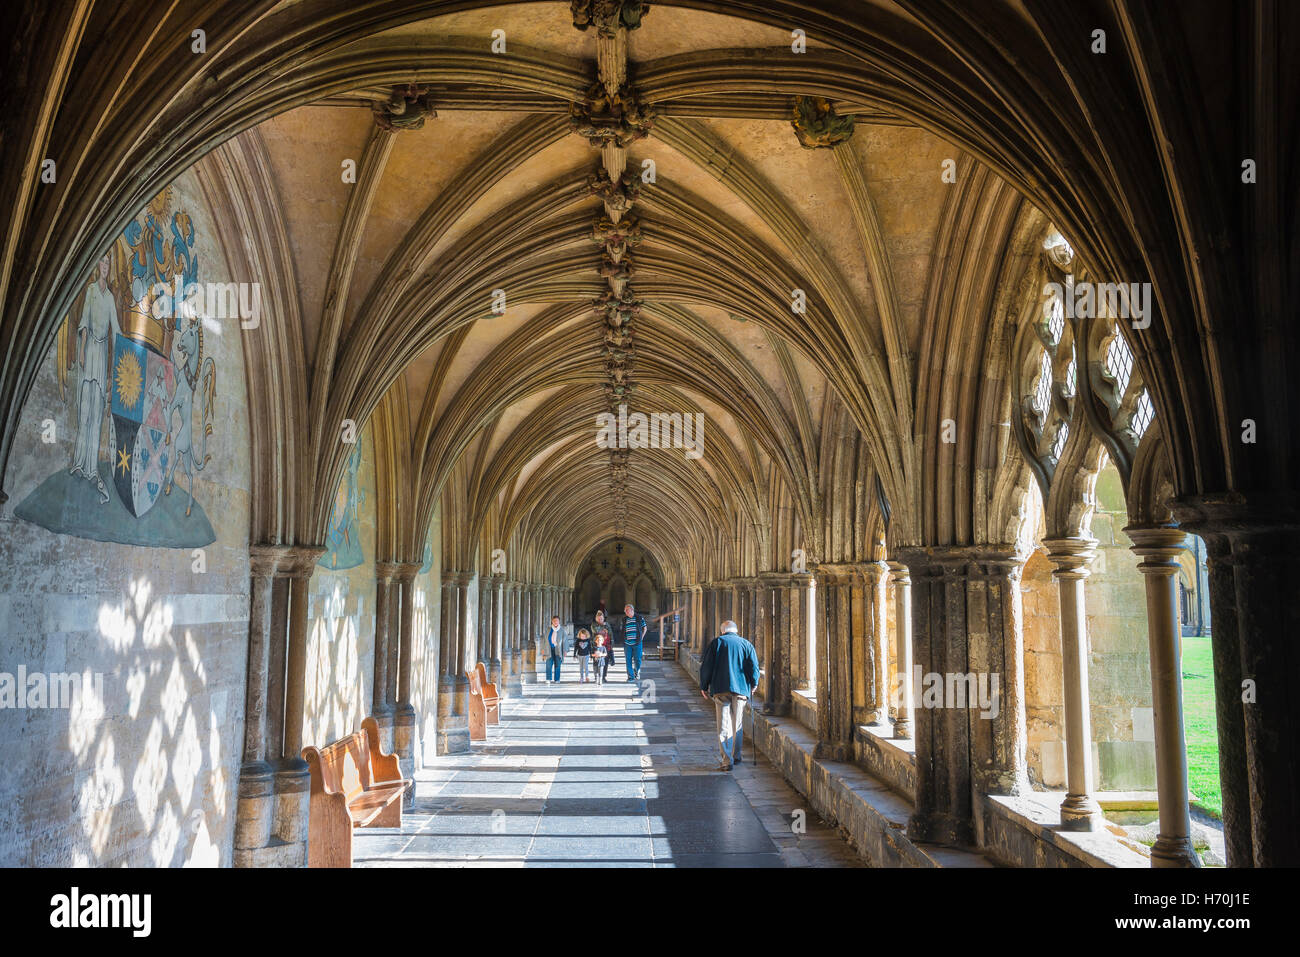 Norwich cathedral cloisters, view of the interior of the 14th century north cloister in Norwich Cathedral, Norfolk, England, UK. Stock Photo